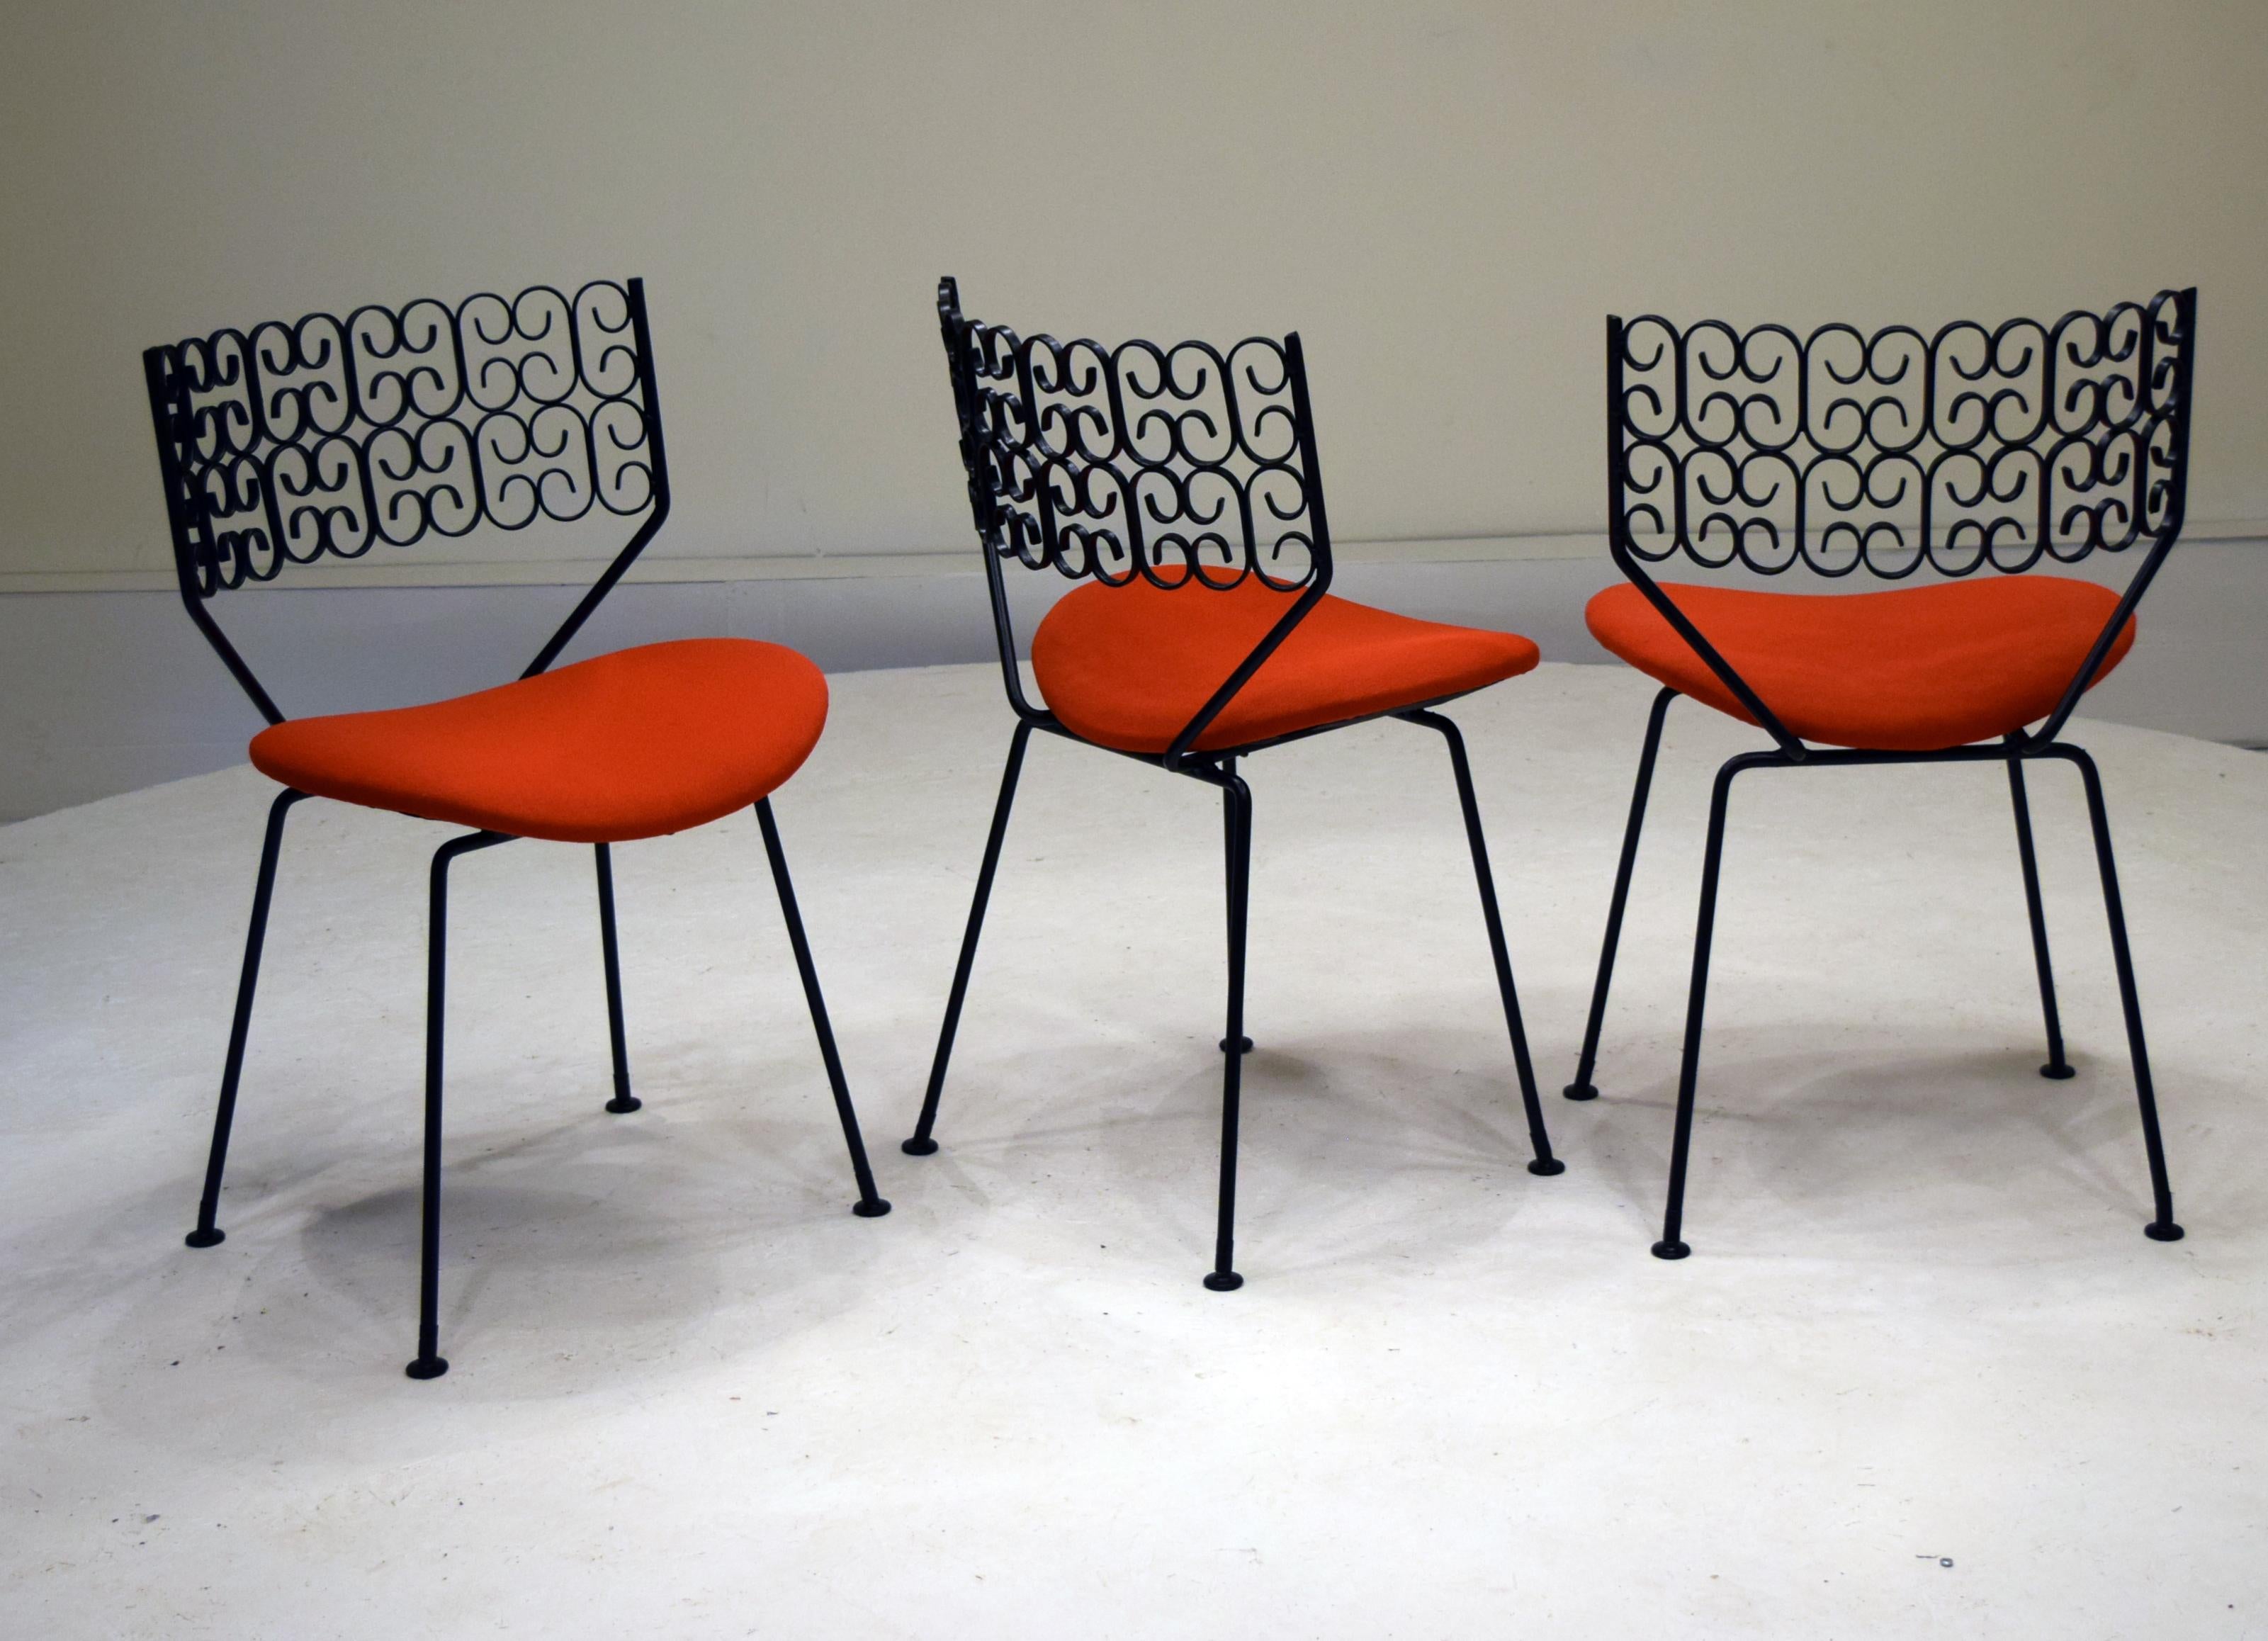 Distributed by Raymor, designed by Arthur Umanoff in 1961 and produced by Boyeur Scortt for their Granada collection. Complete dining suite set.
Chairs measure 19